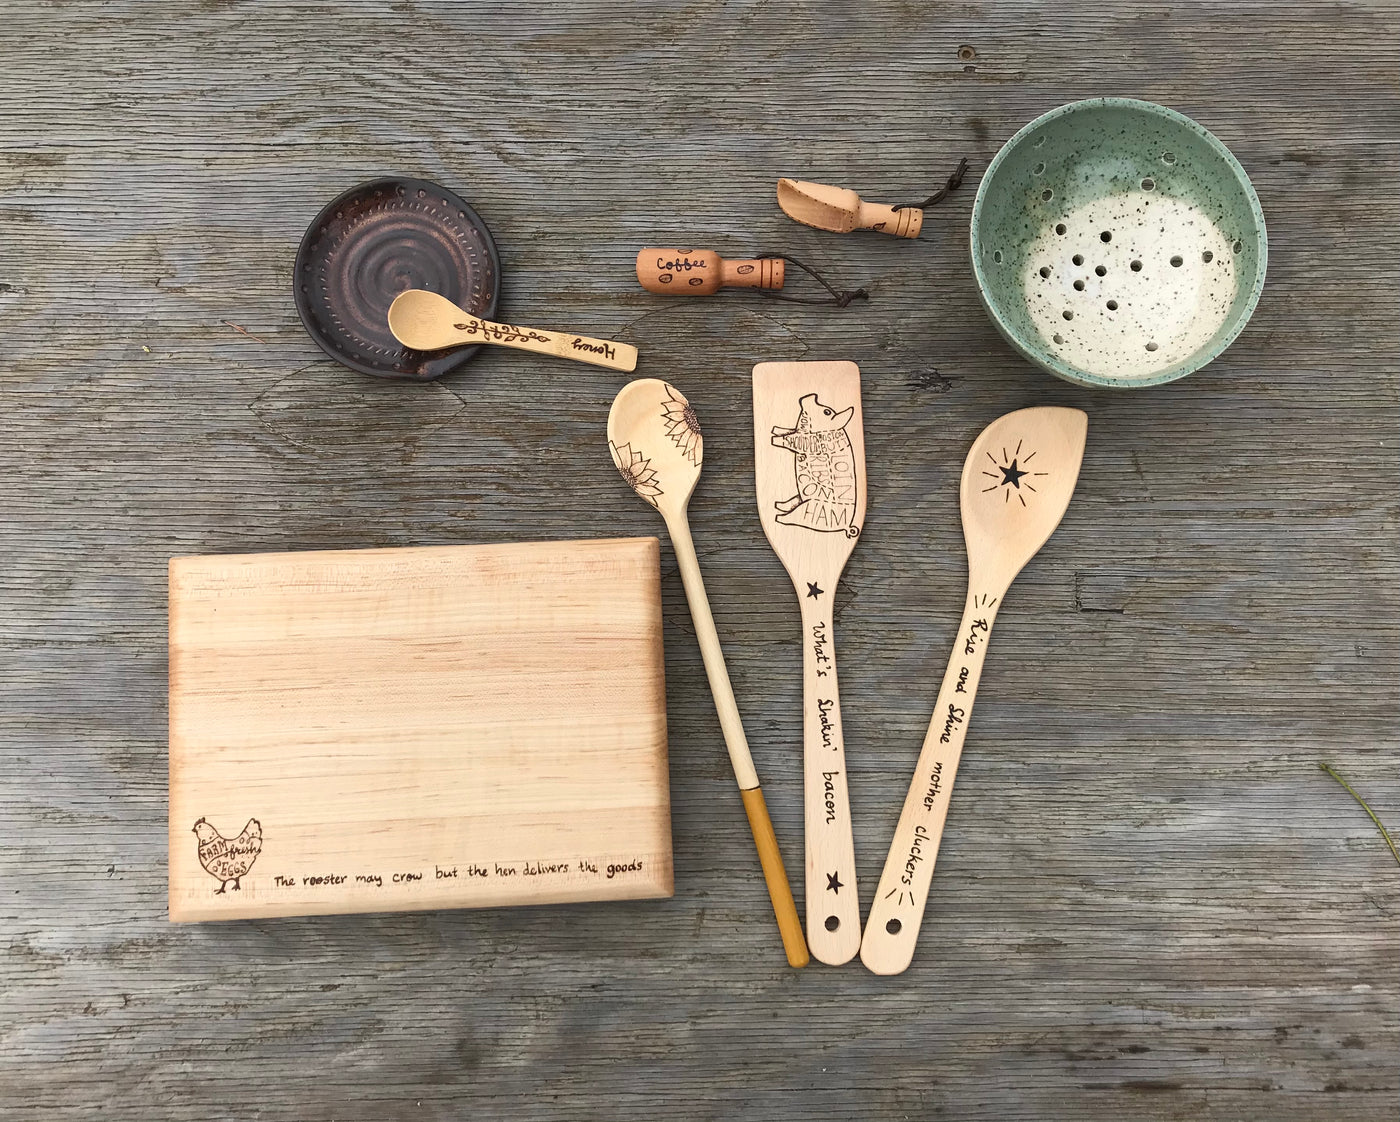 Wooden Cooking Utensil Care.  Wood Cutting Board Care.  Info on how to care for your wooden kitchen items so they will last a long time.